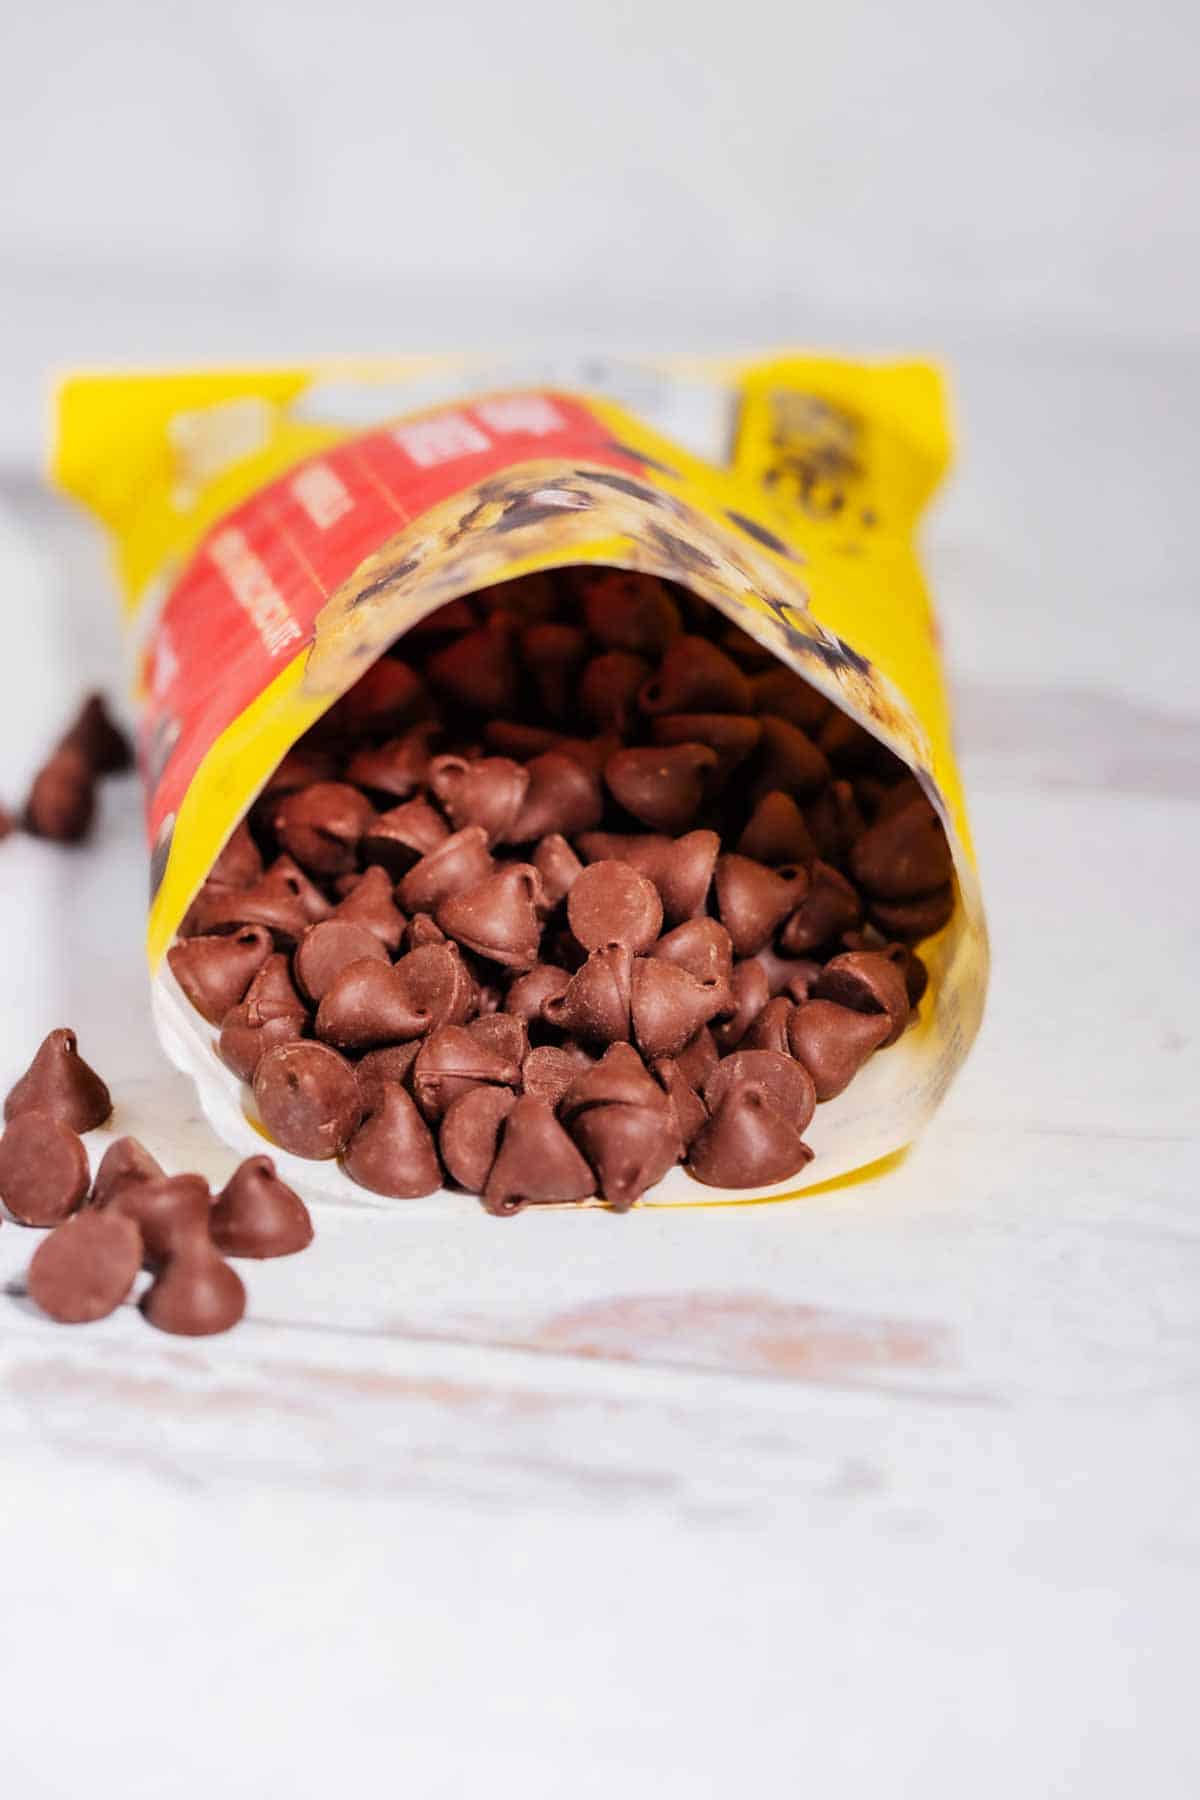 A bag of milk chocolate chips with the end opened so that you can see inside.